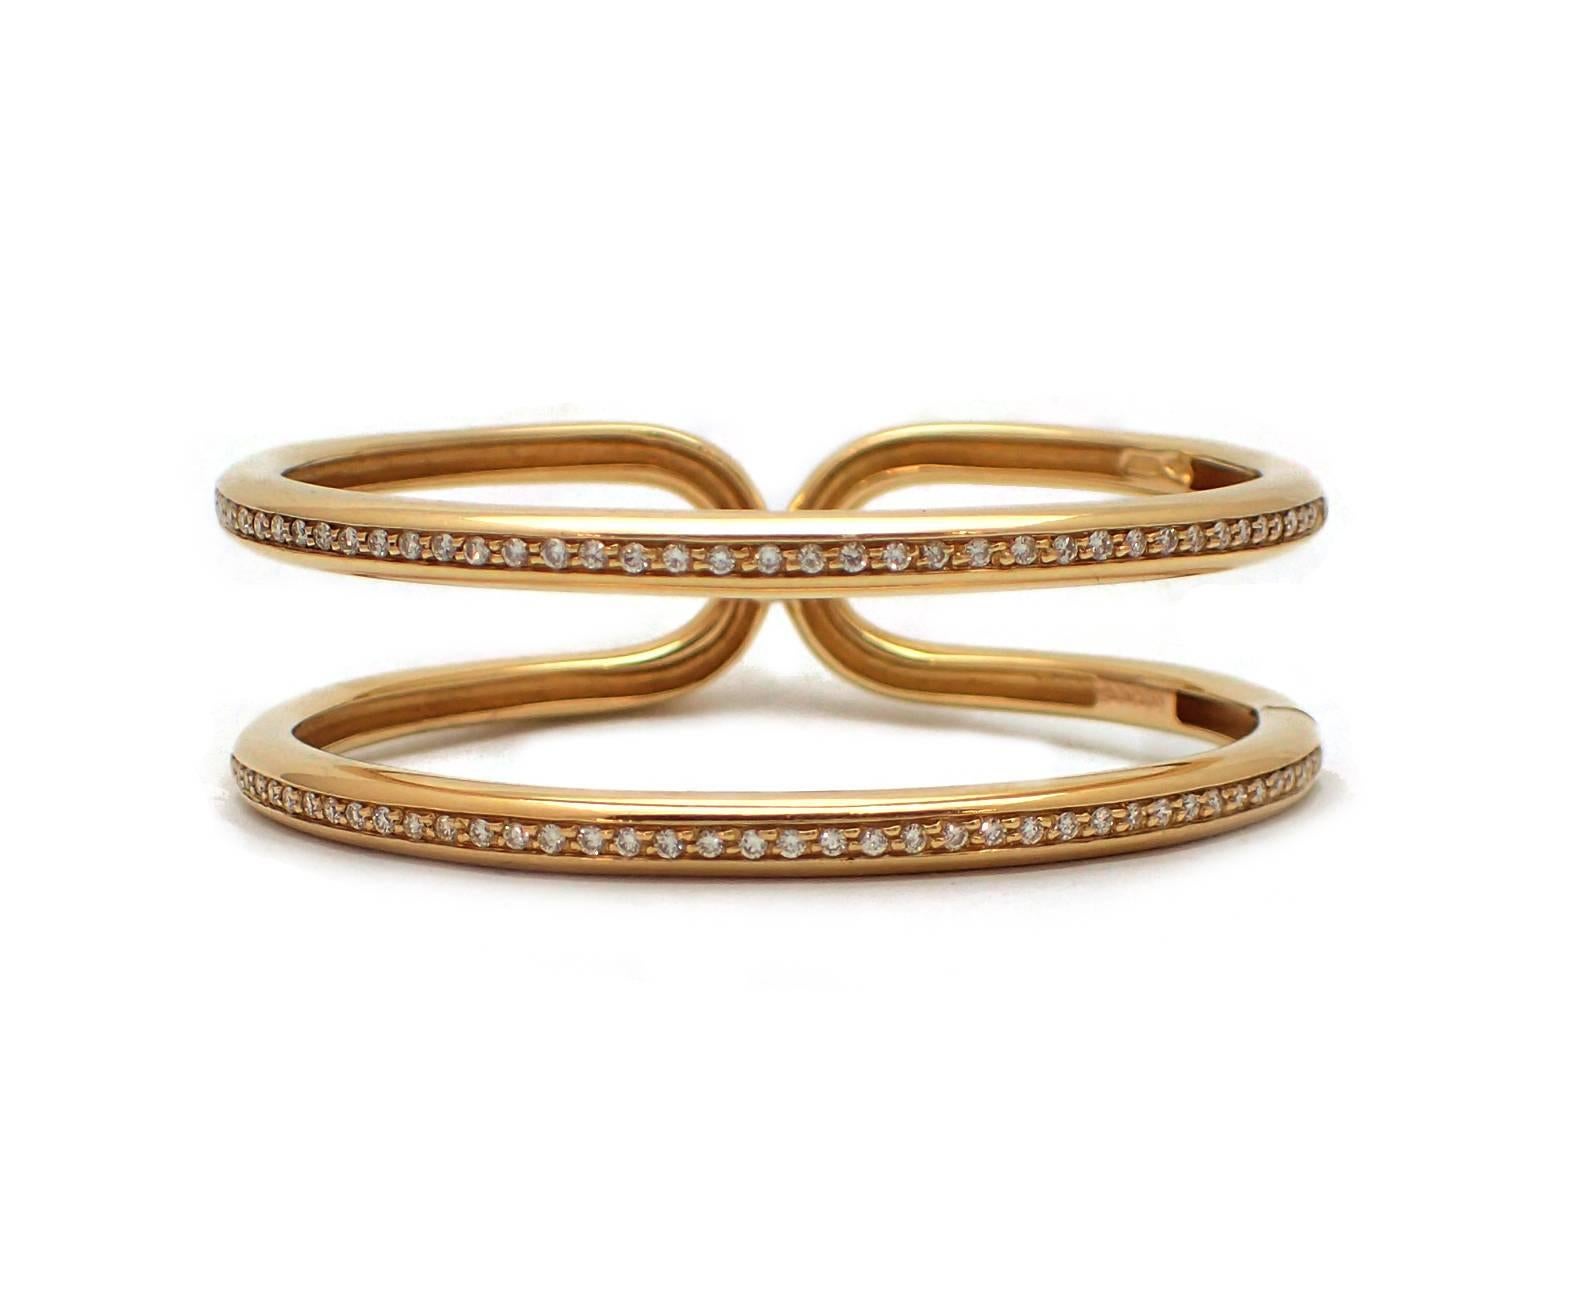 Open Antonini cuff bracelet in 18k yellow gold accented with almost one carat of diamonds, G-H color, VS clarity.